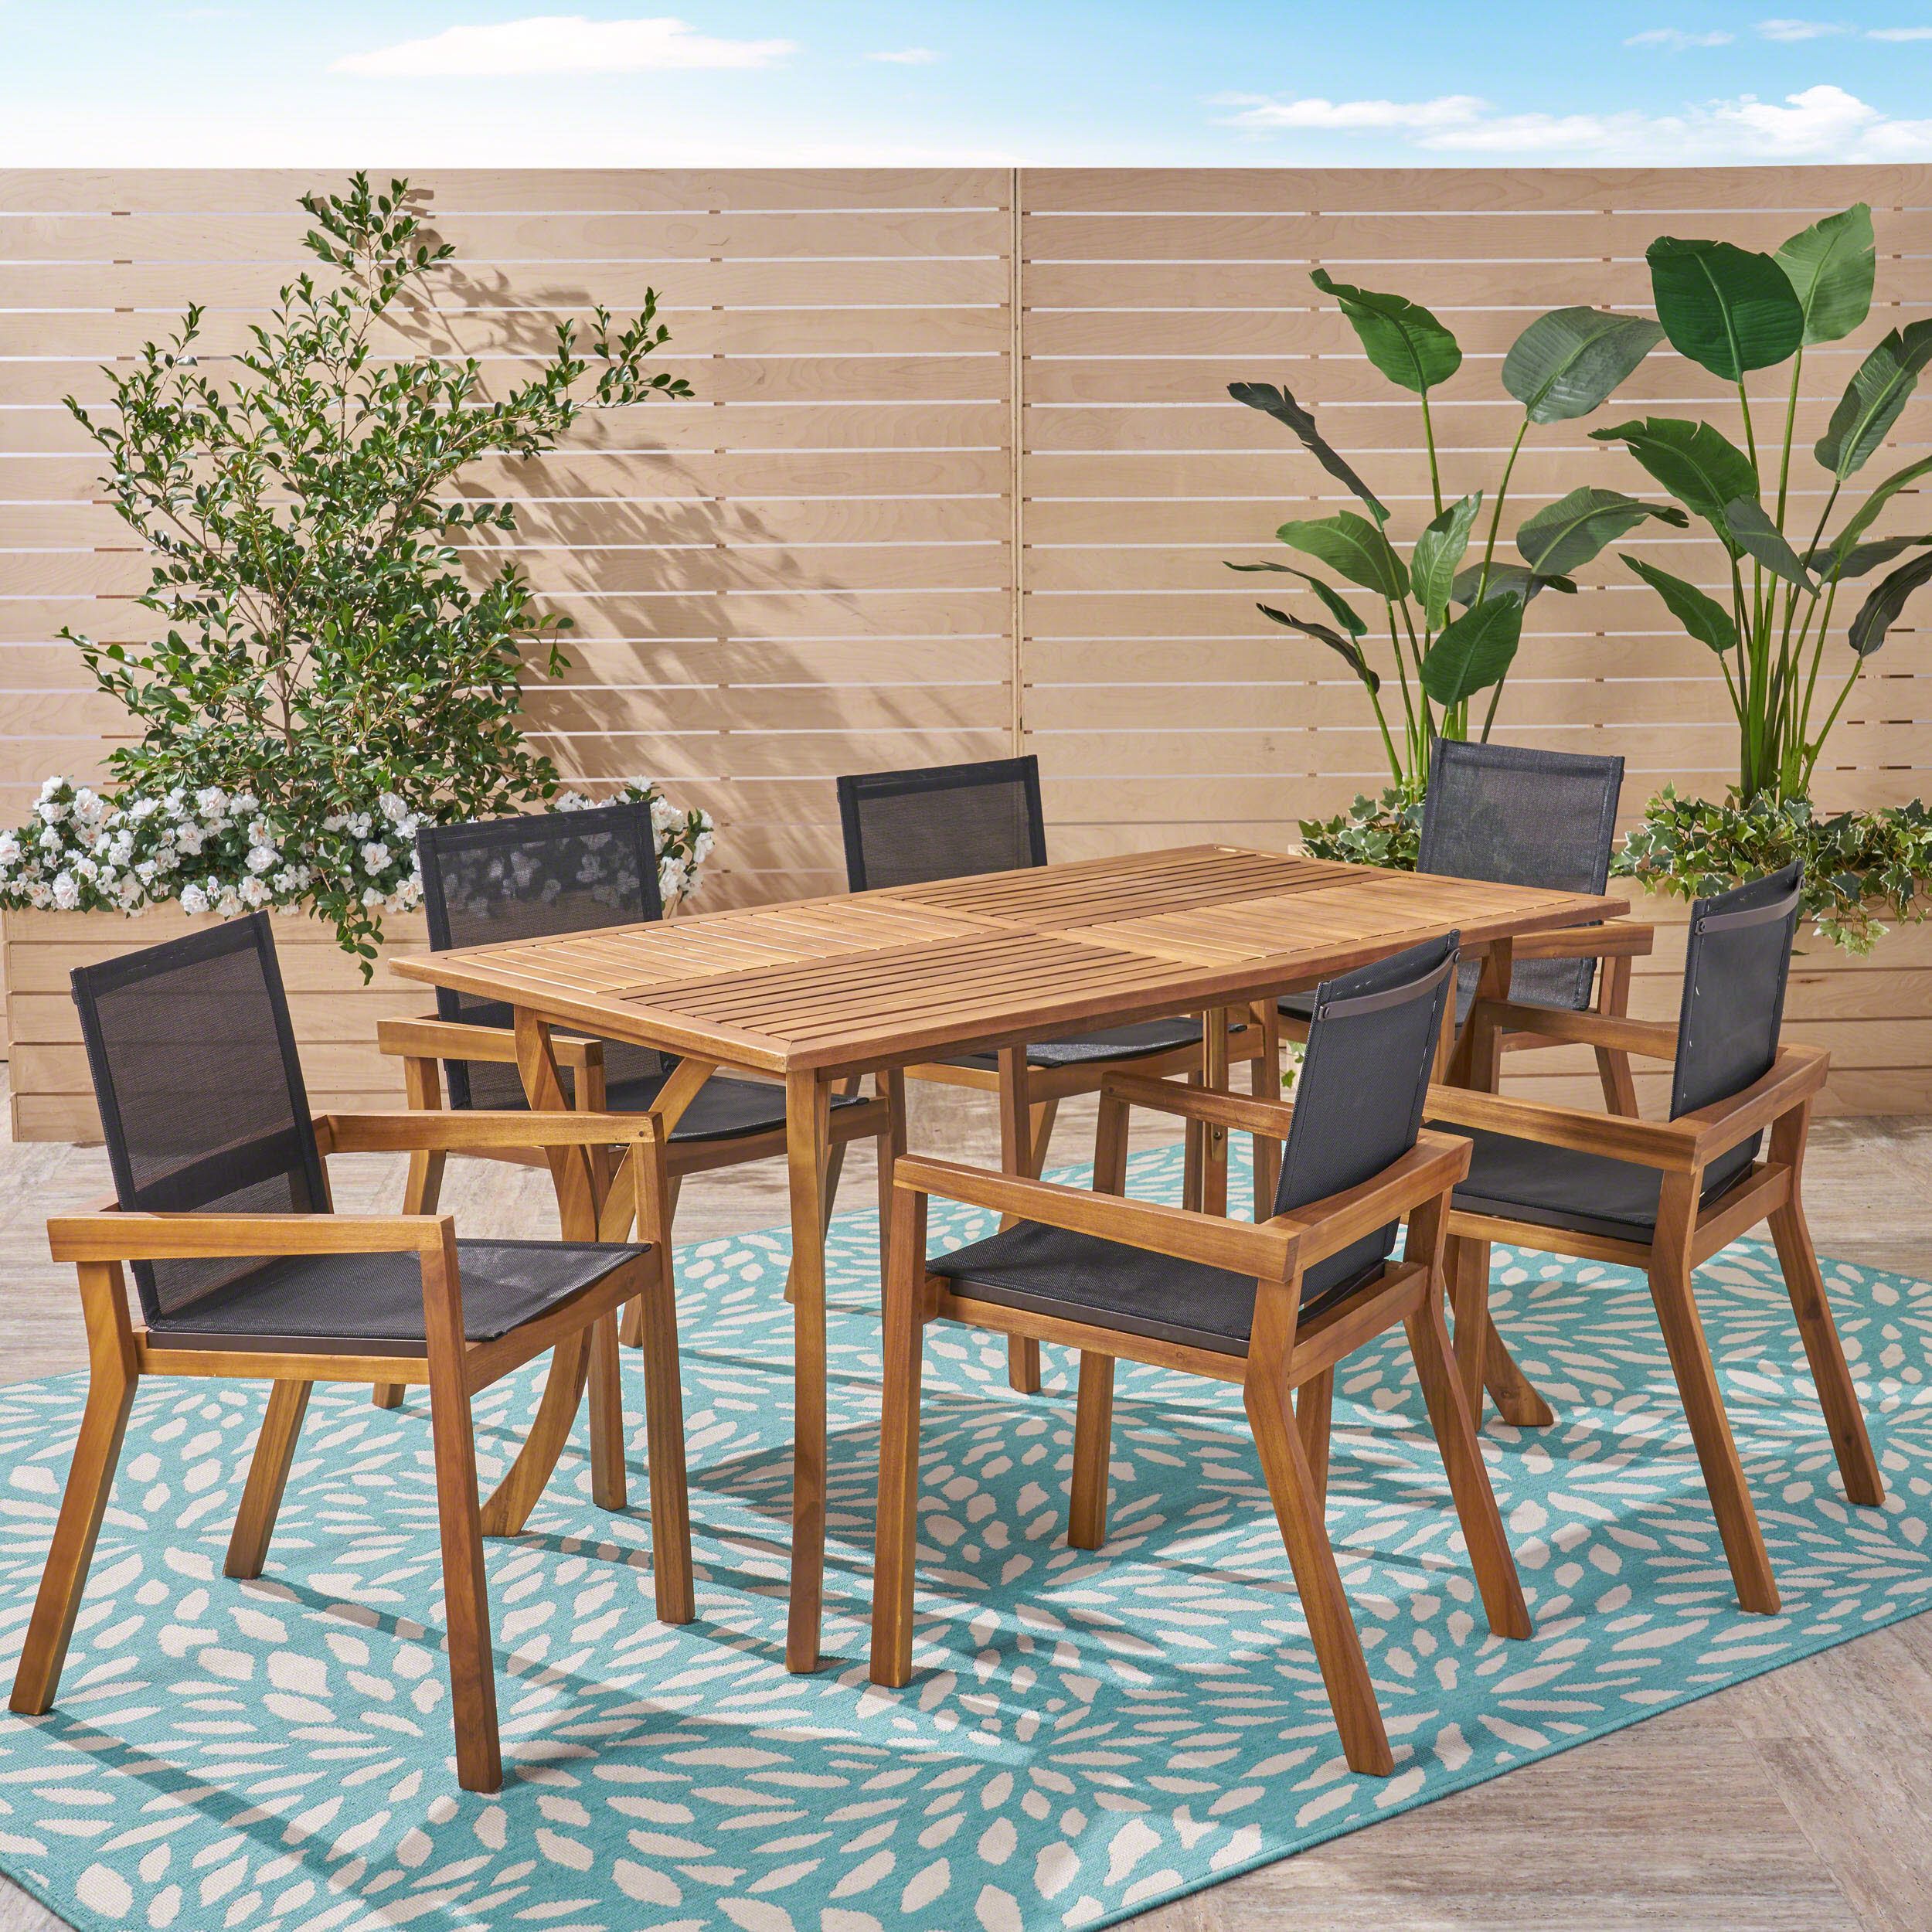 Kaur Outdoor Acacia Wood 7 Piece Dining Set With Mesh Seats, Teak And With Regard To Acacia Wood Outdoor Seating Patio Sets (View 1 of 15)